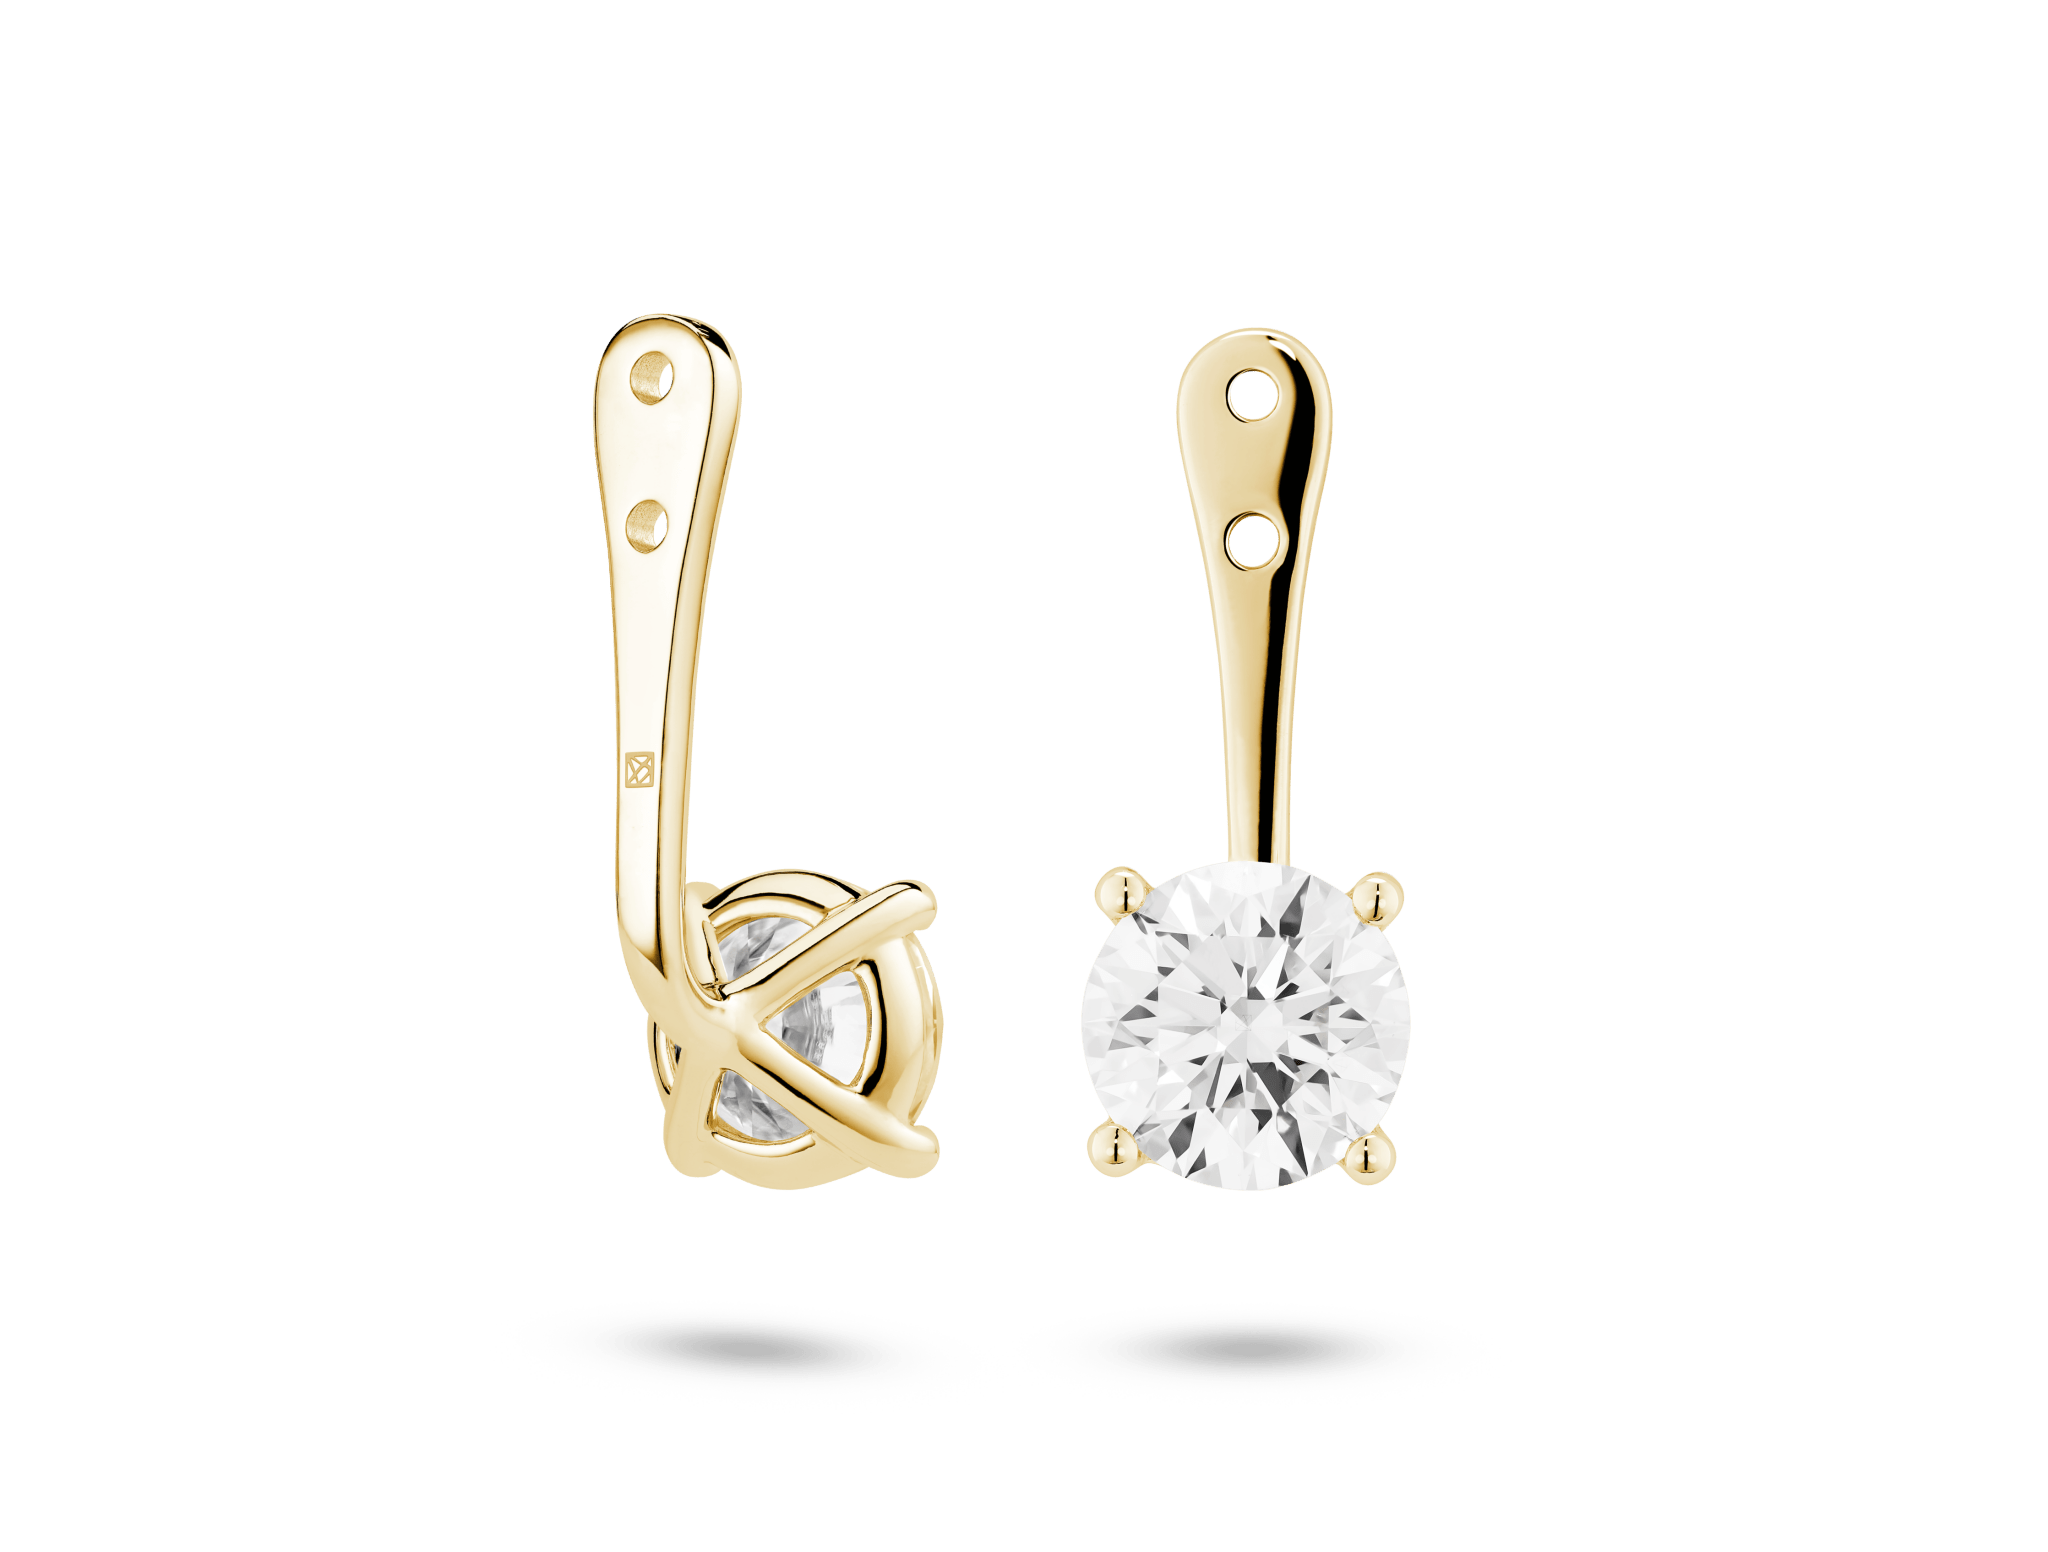 Lab-Grown Diamond 2ct. tw. Round Brilliant Solitaire Ear Jacket Earrings | White - #Lightbox Jewelry#